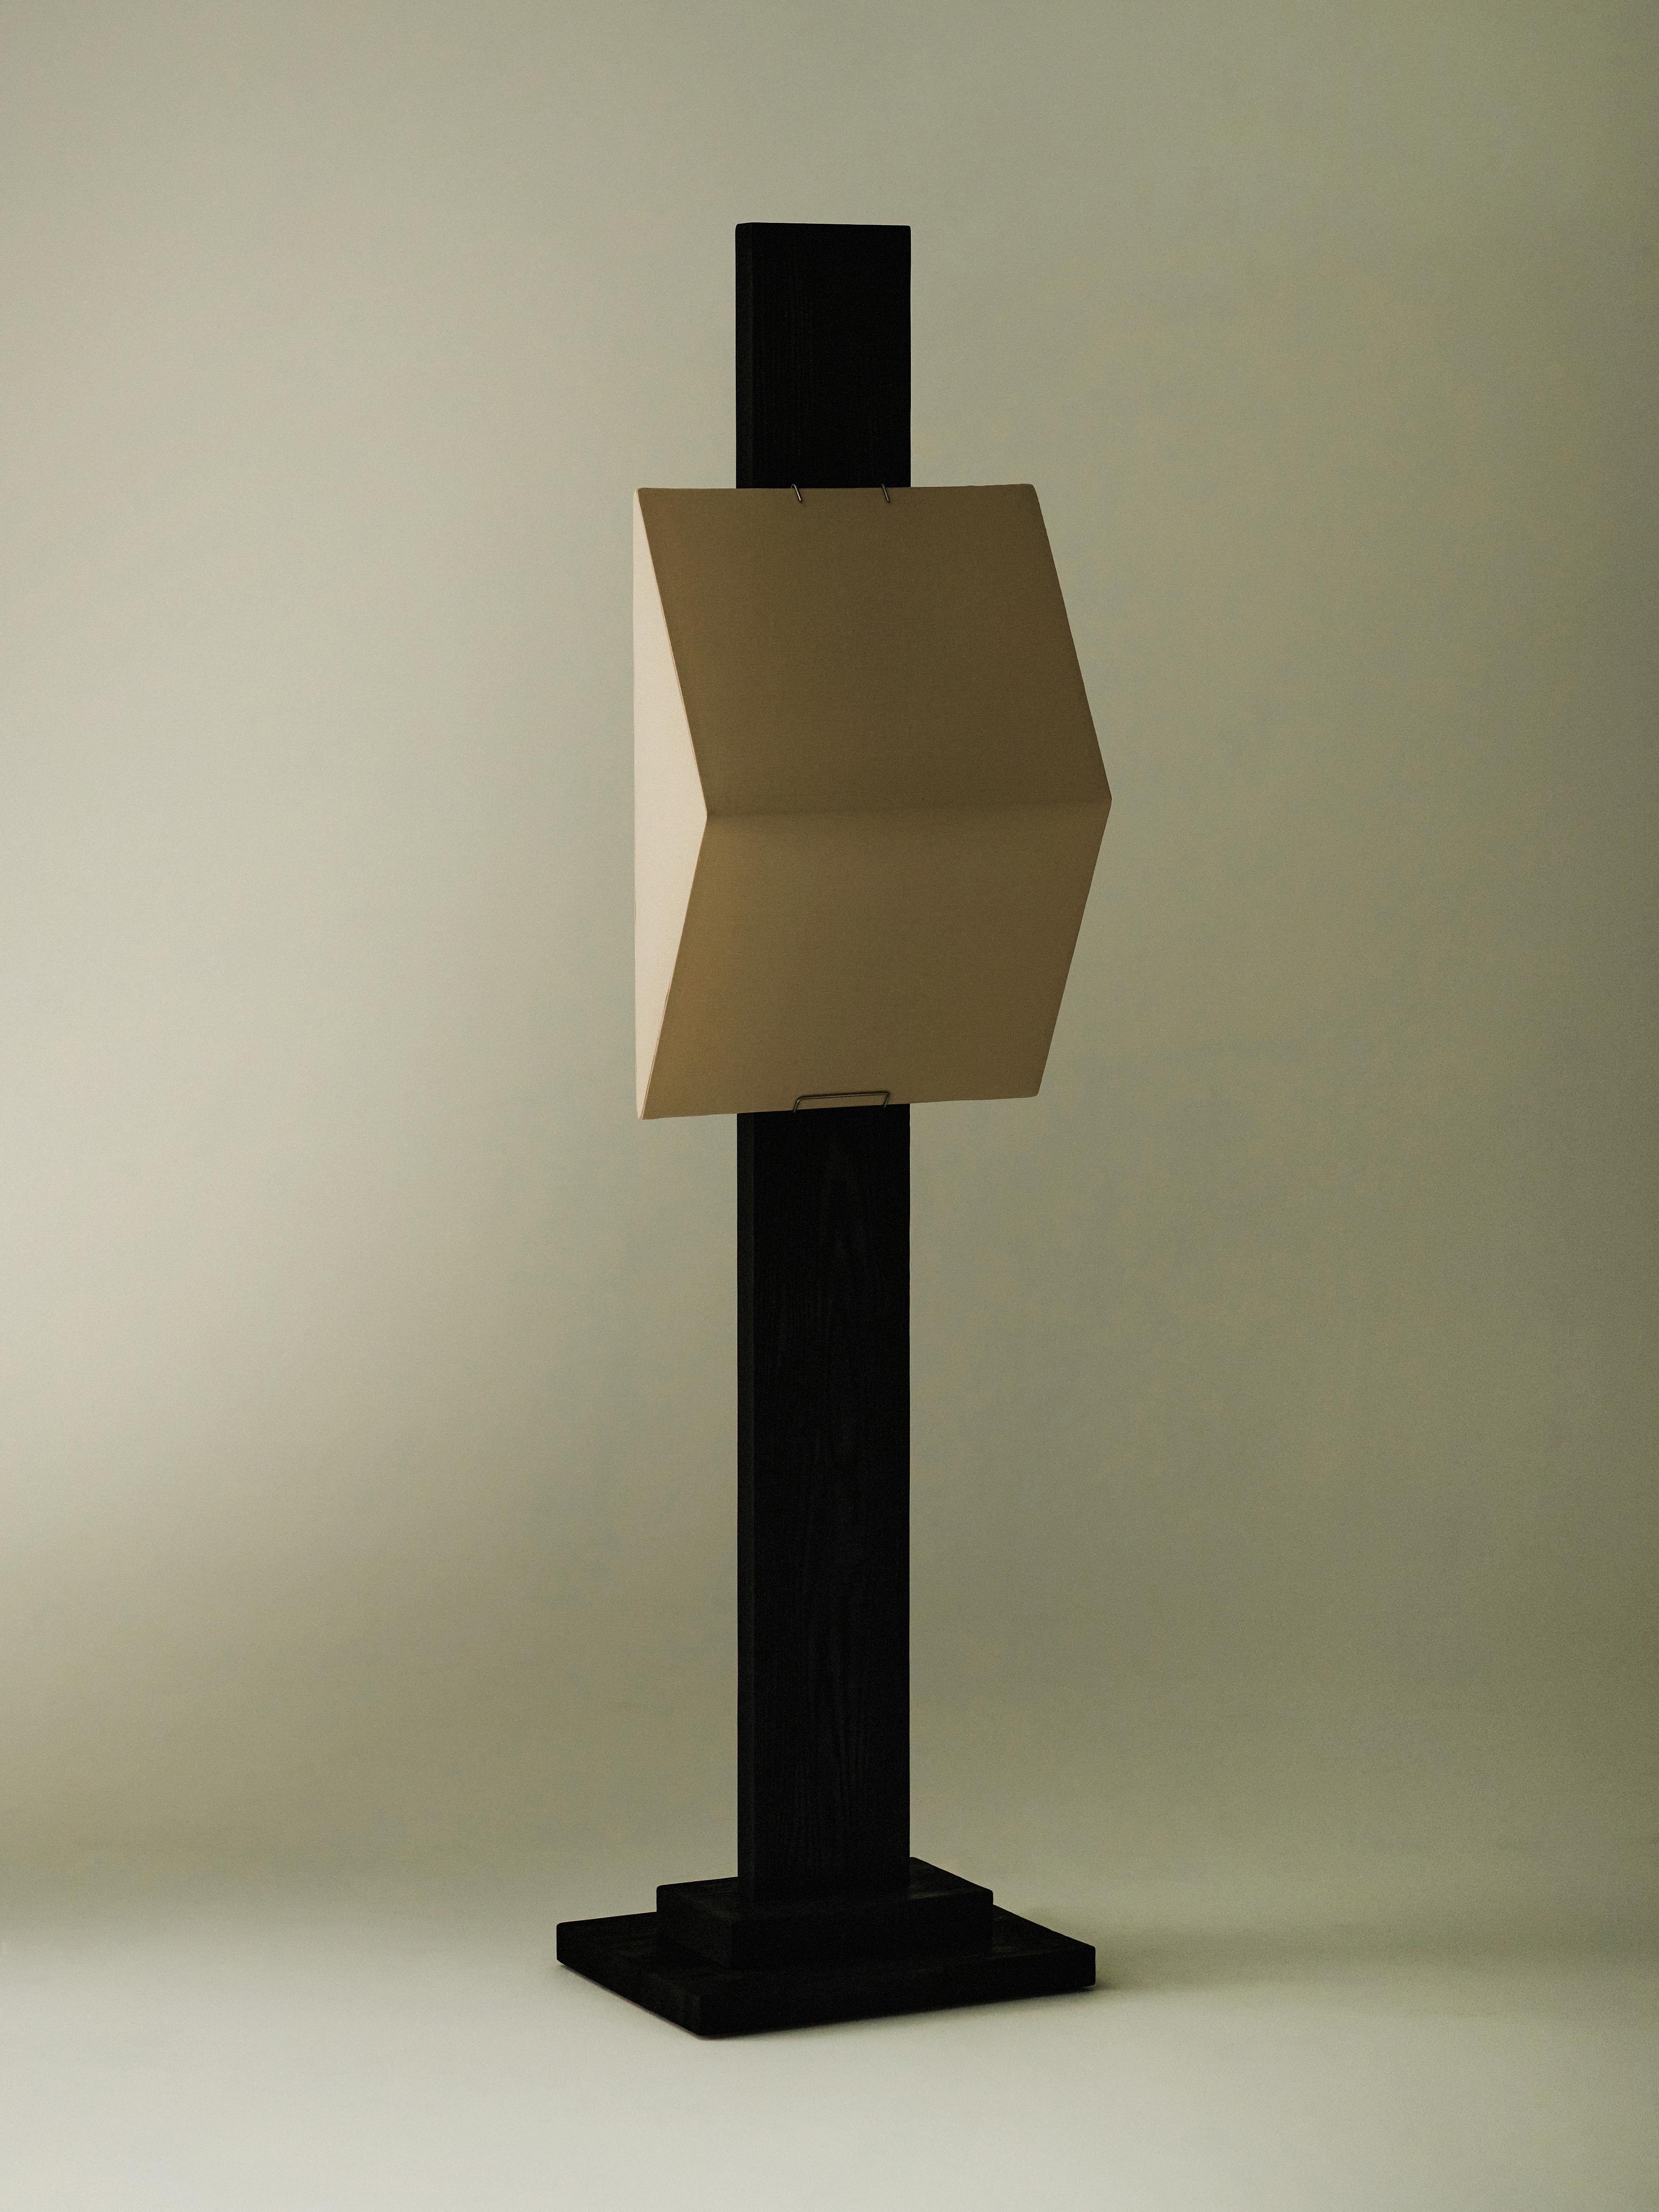 No.0122 standing lamp by Olivia Bossy.
Numbered.
Dimensions: D45 x W35 x H180 cm
Materials: Charred Tallow and Cambia ash, stainless steel, linen.

All our lamps can be wired according to each country. If sold to the USA it will be wired for